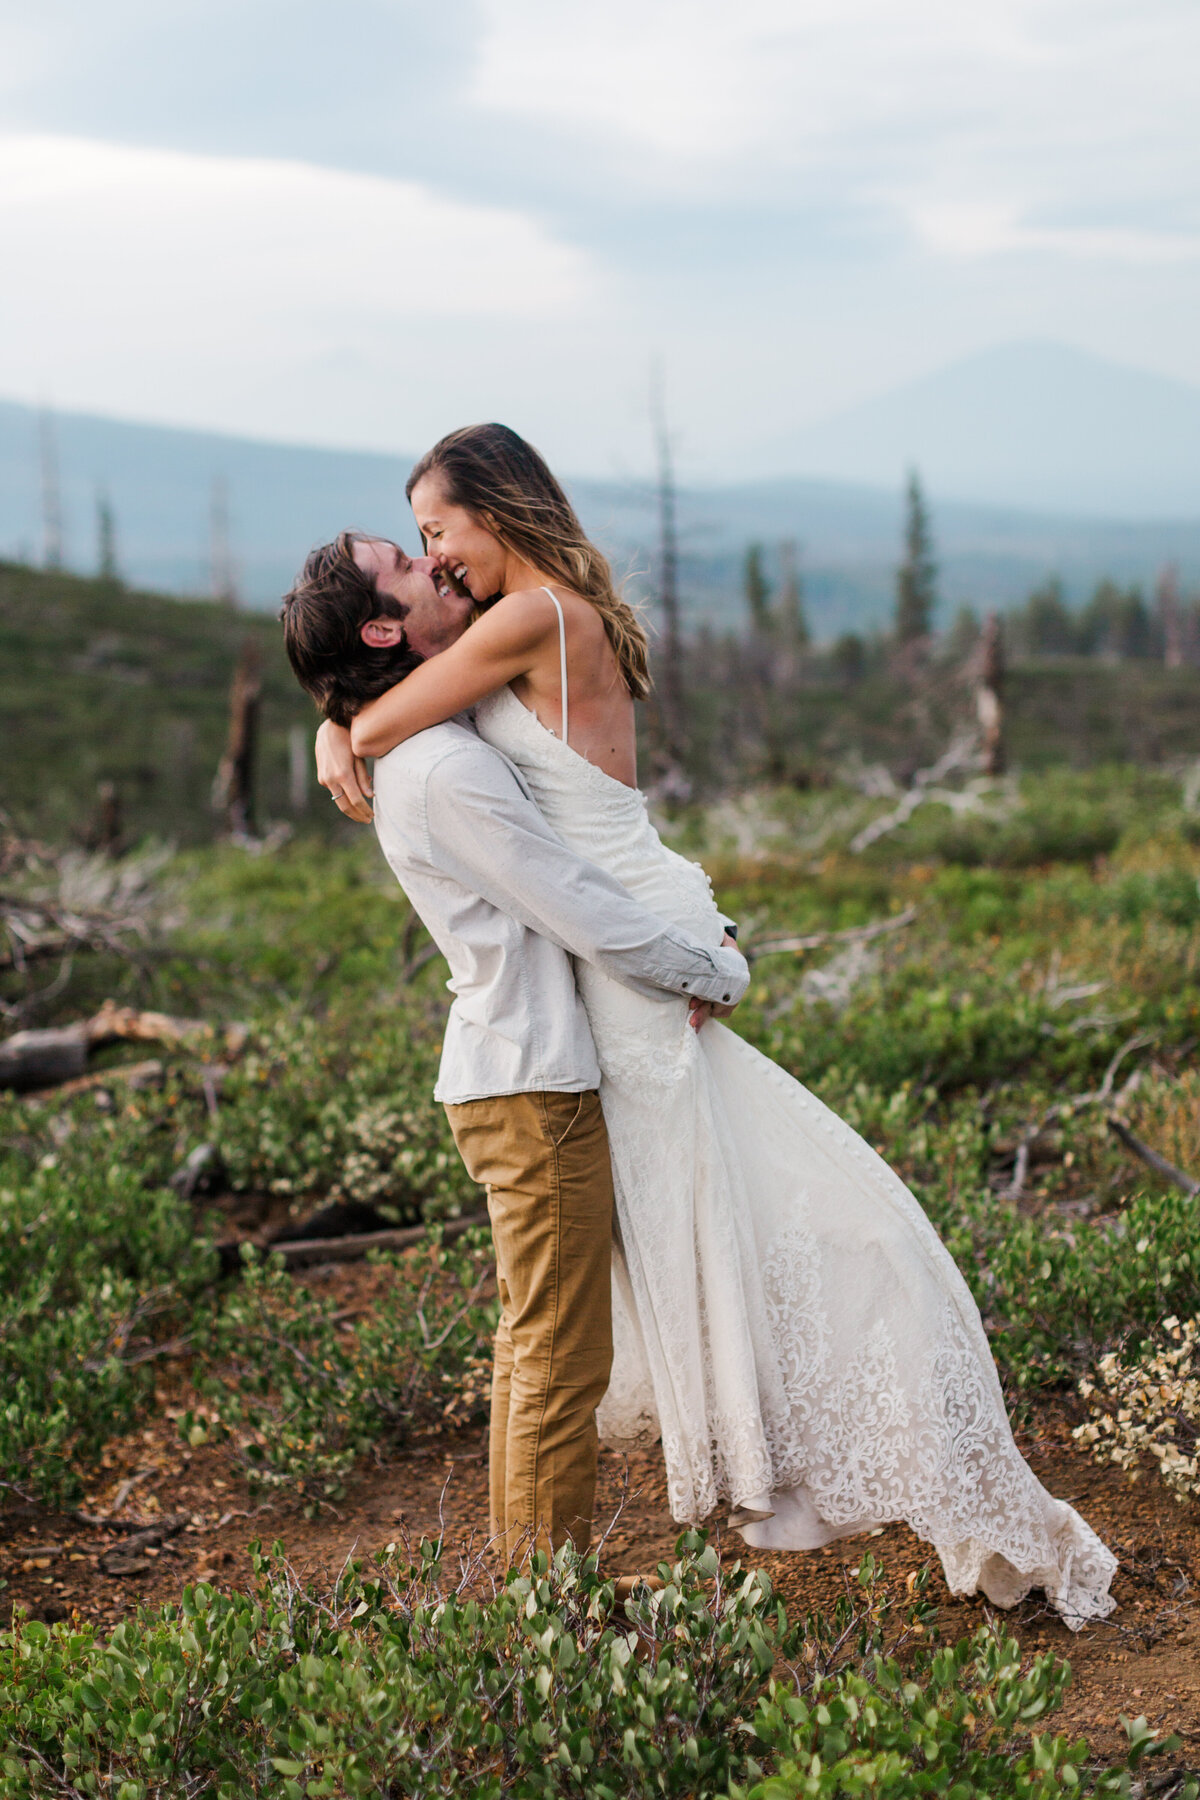 Bend Adventure Elopement 3 Sisters 2020 - HANNAH TURNER PHOTOGRAPHY-10